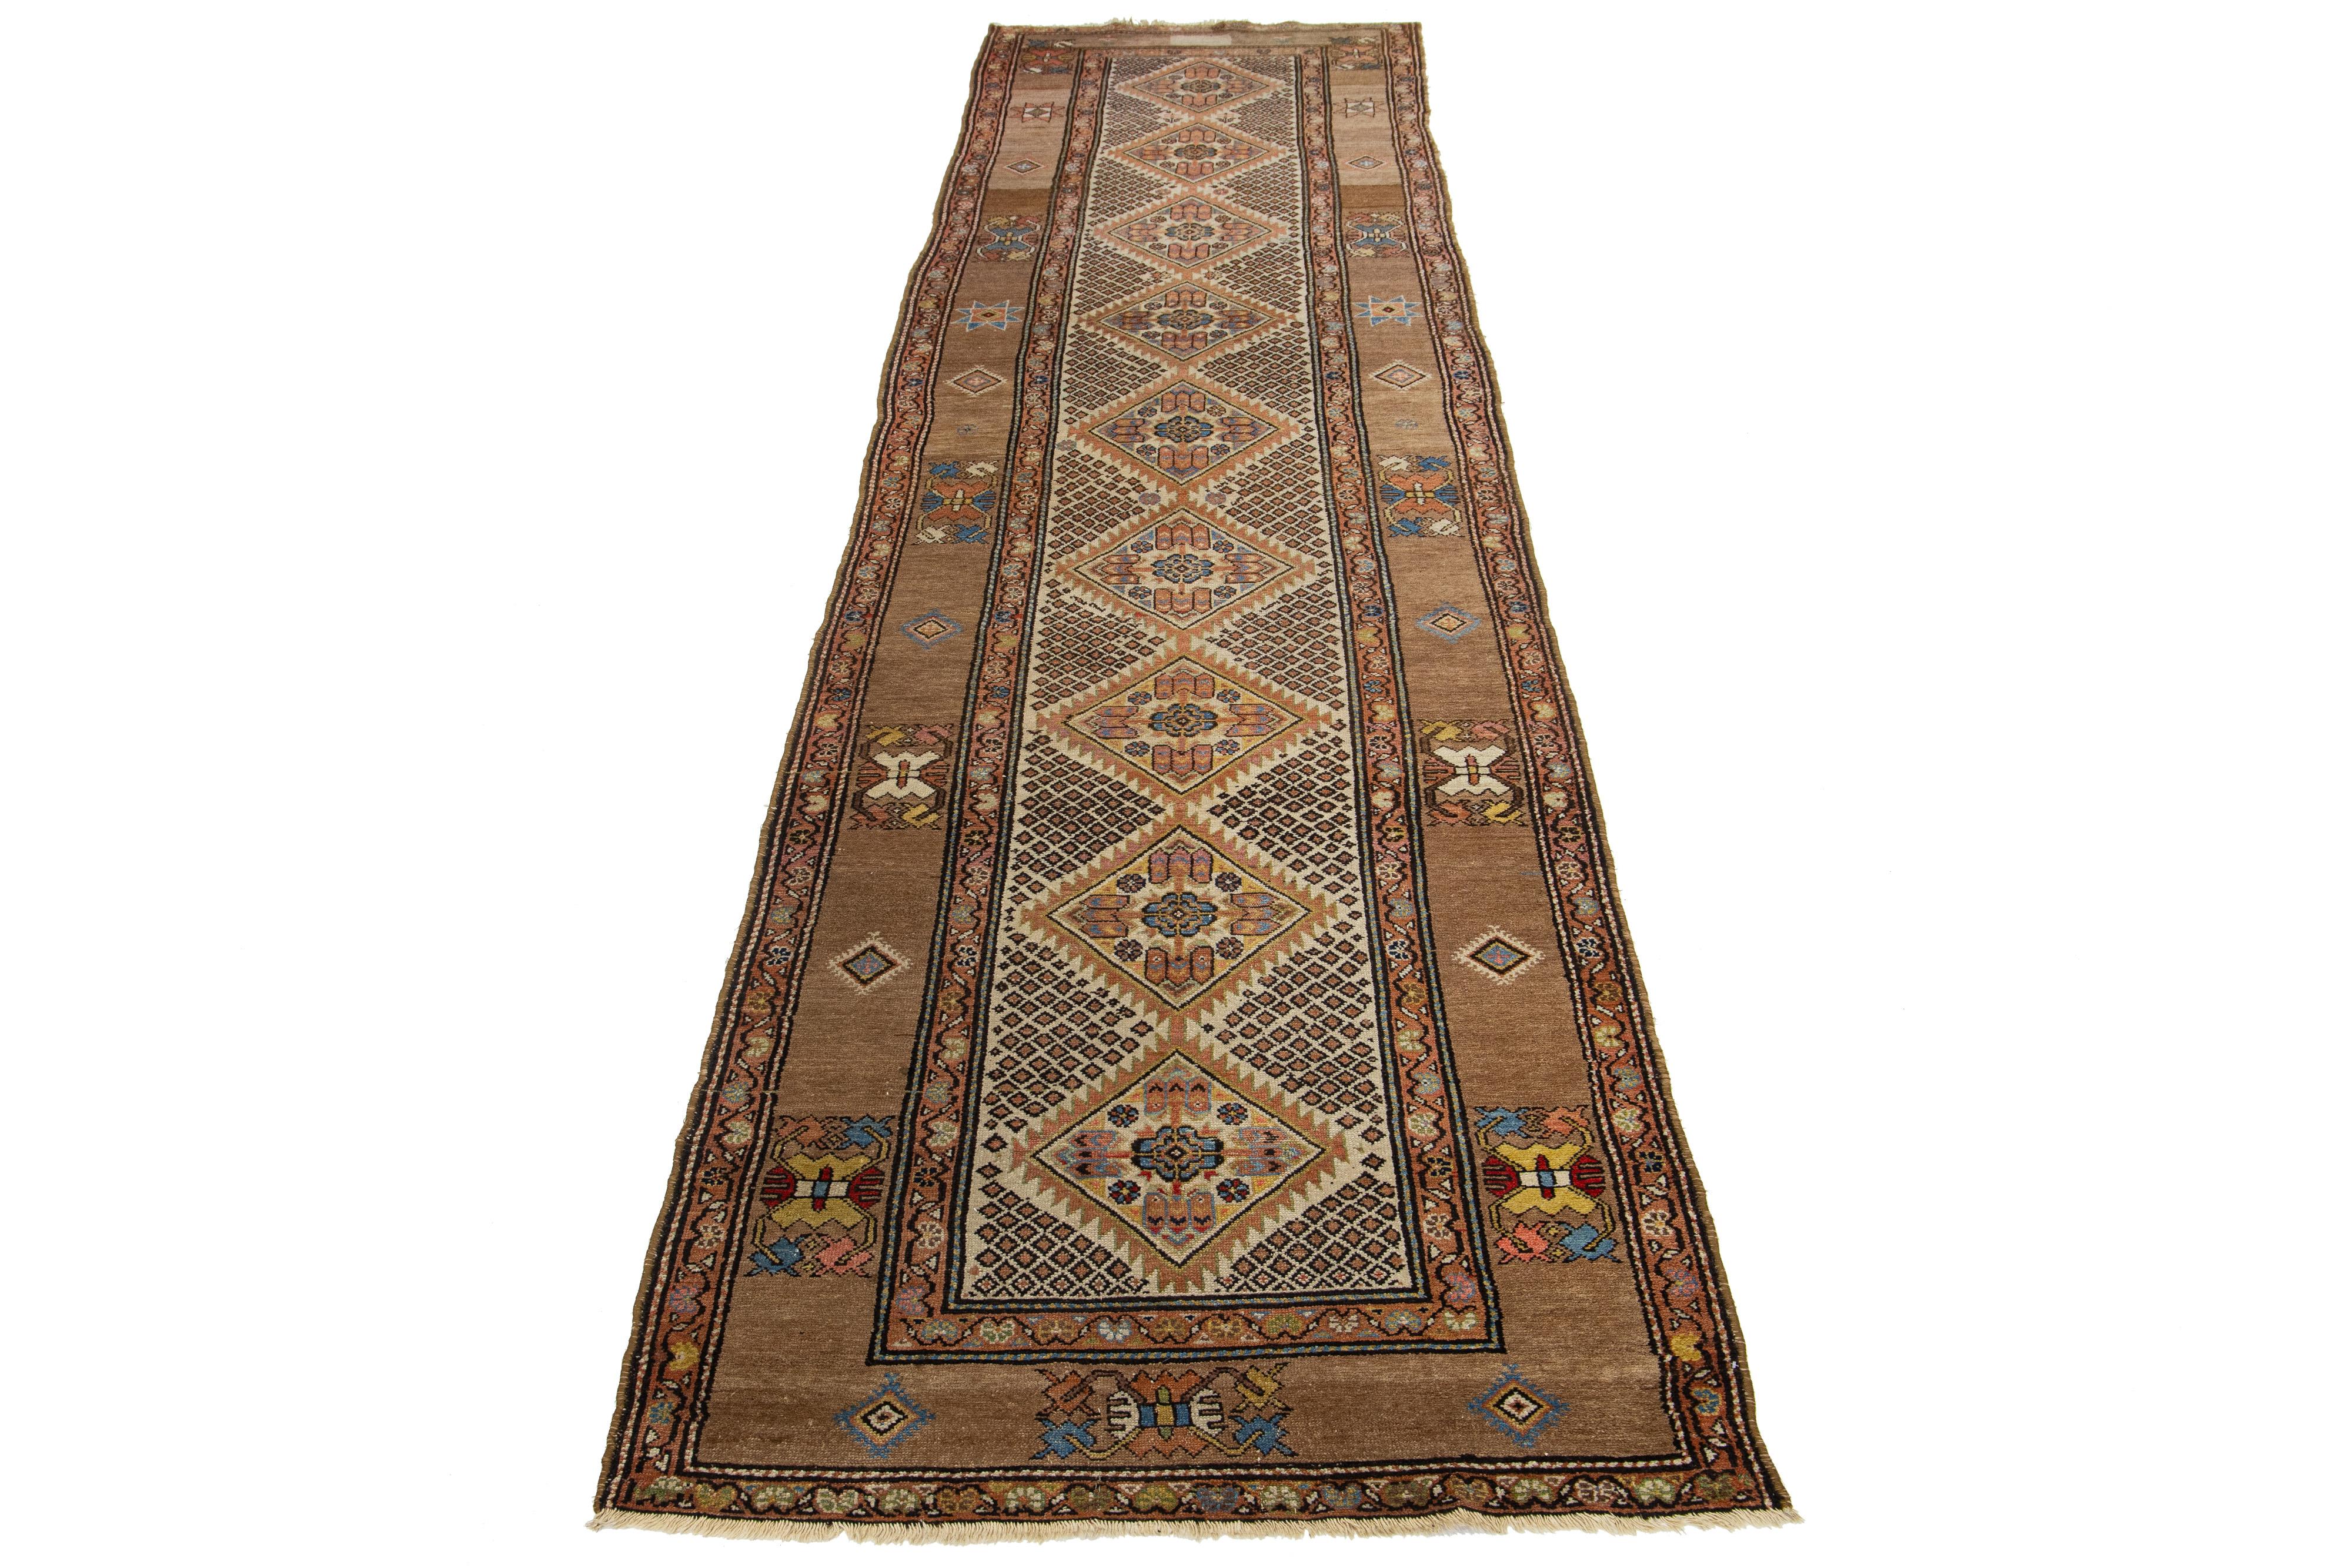 This beautiful antique Malayer hand-knotted wool runner features a beige color field. The Persian rug showcases a stunning all-over design with accents of blue, peach, and brown.

This rug measures 3'9